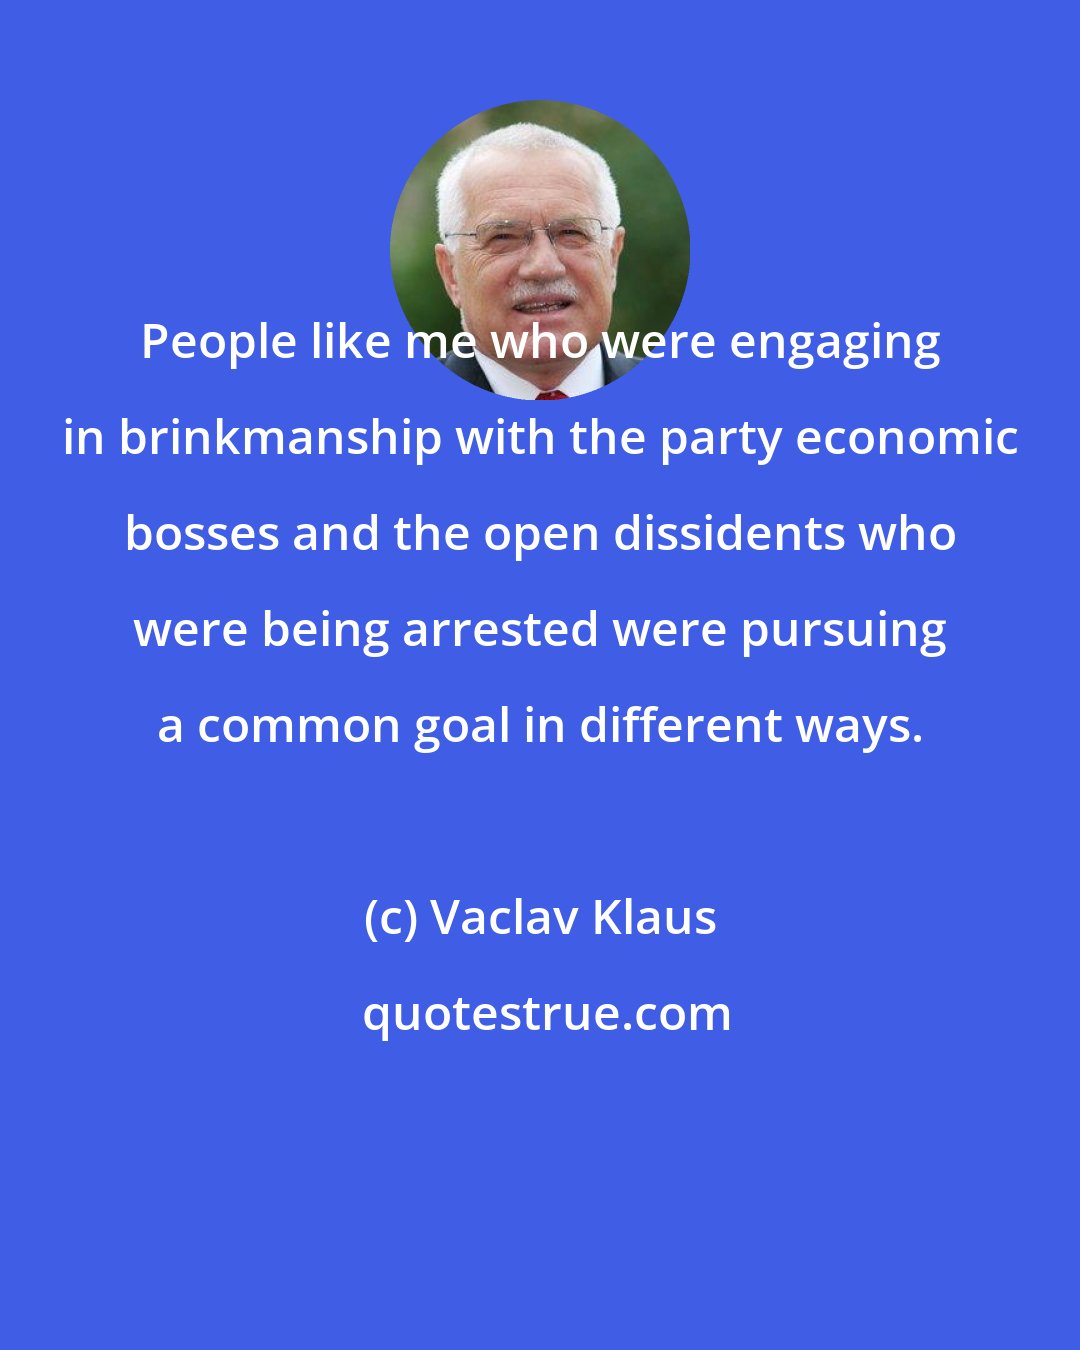 Vaclav Klaus: People like me who were engaging in brinkmanship with the party economic bosses and the open dissidents who were being arrested were pursuing a common goal in different ways.